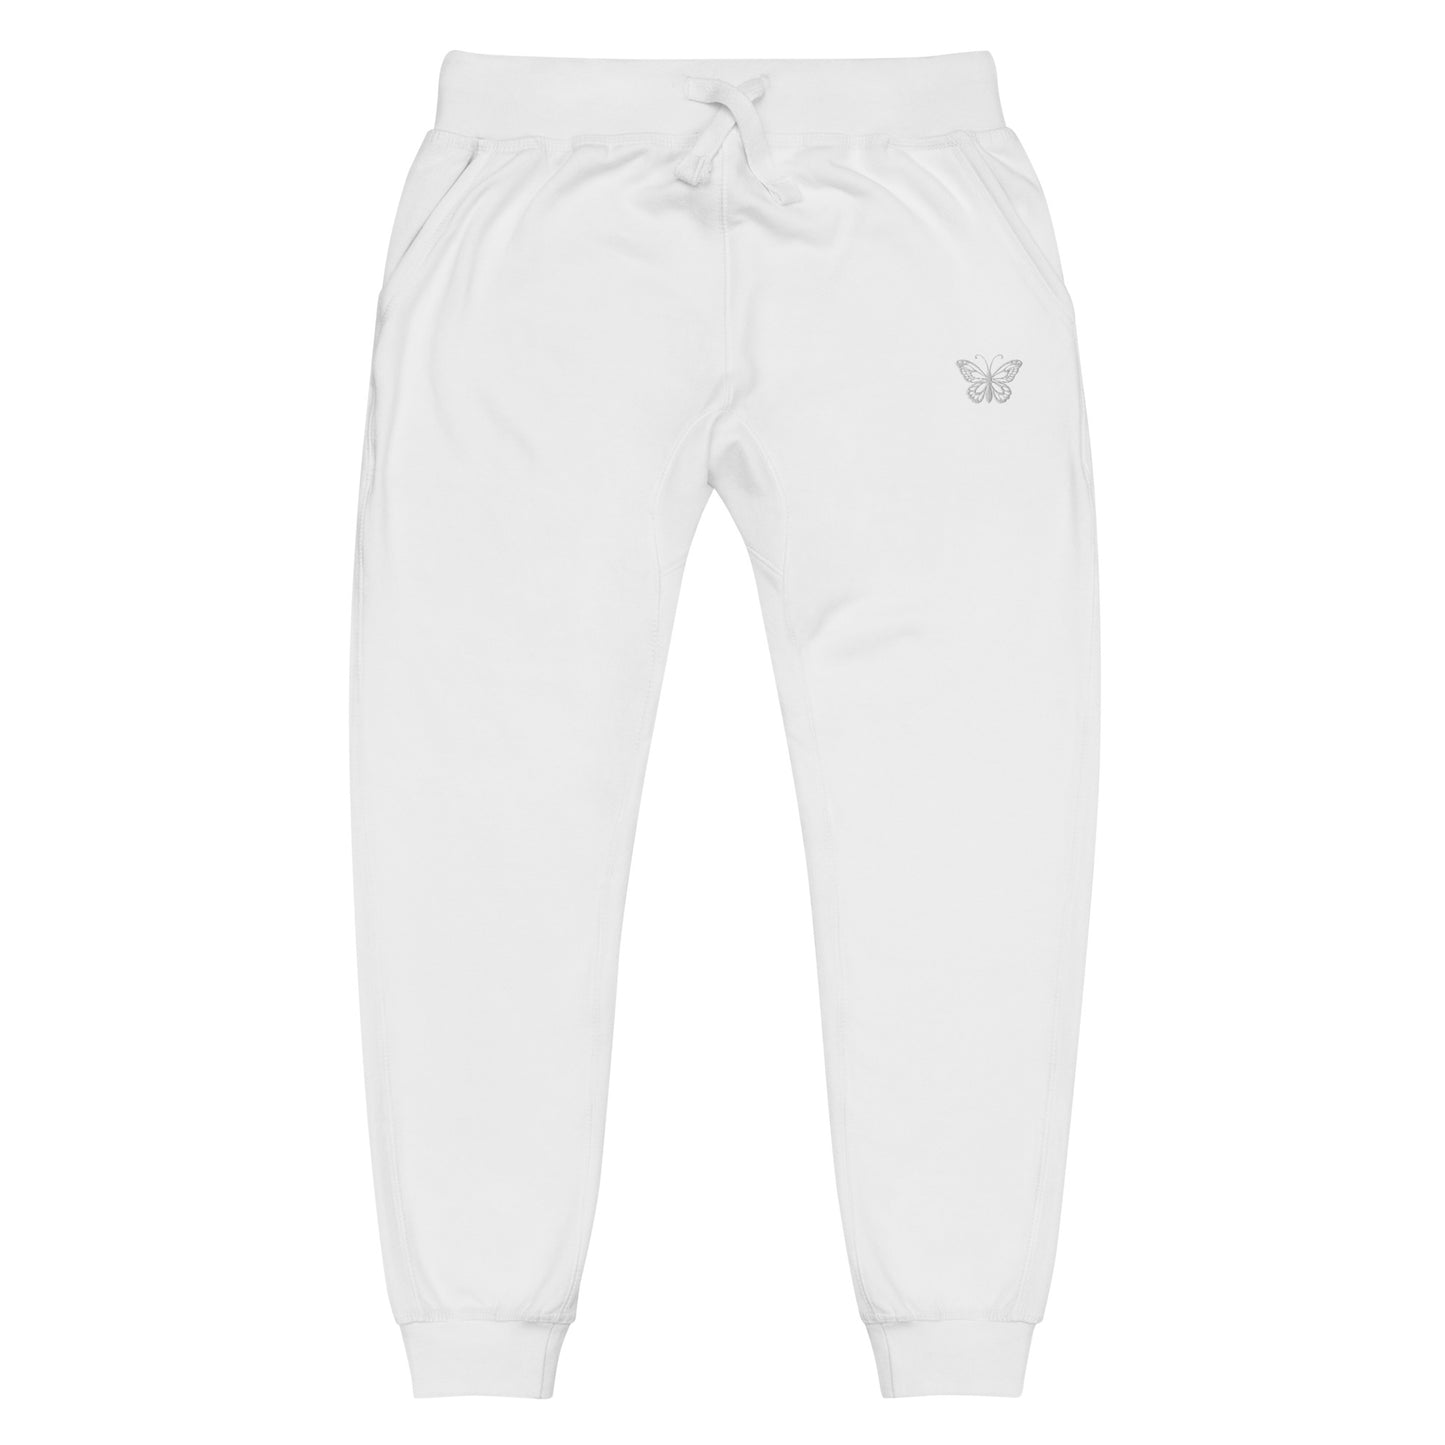 White Unisex Fleece Sweatpants Embroidered Butterfly